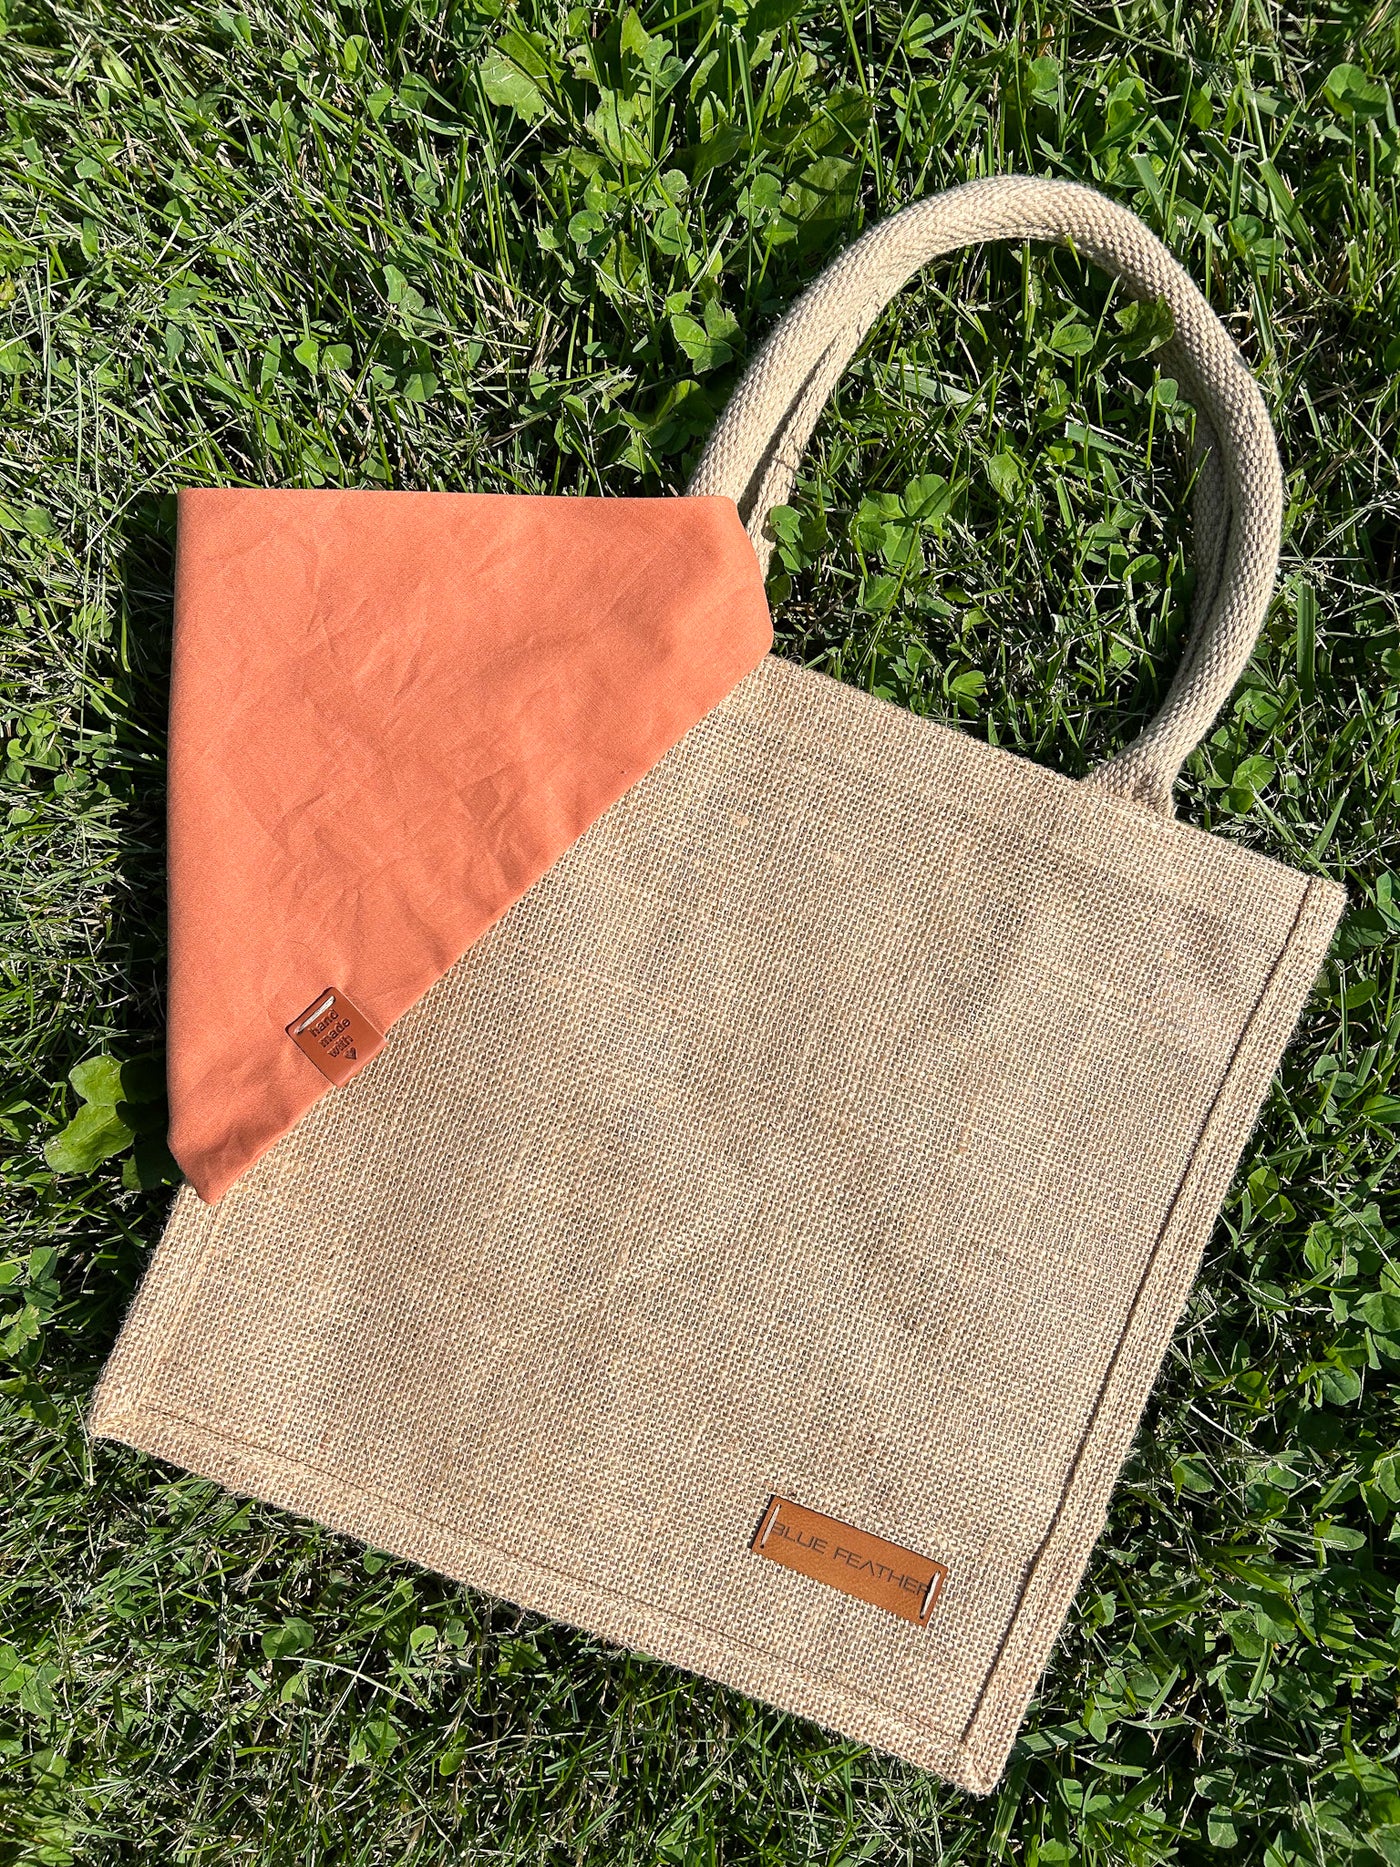 Medium YUTE Bag with Chic Cotton Handles - Effortless Style on the Go!